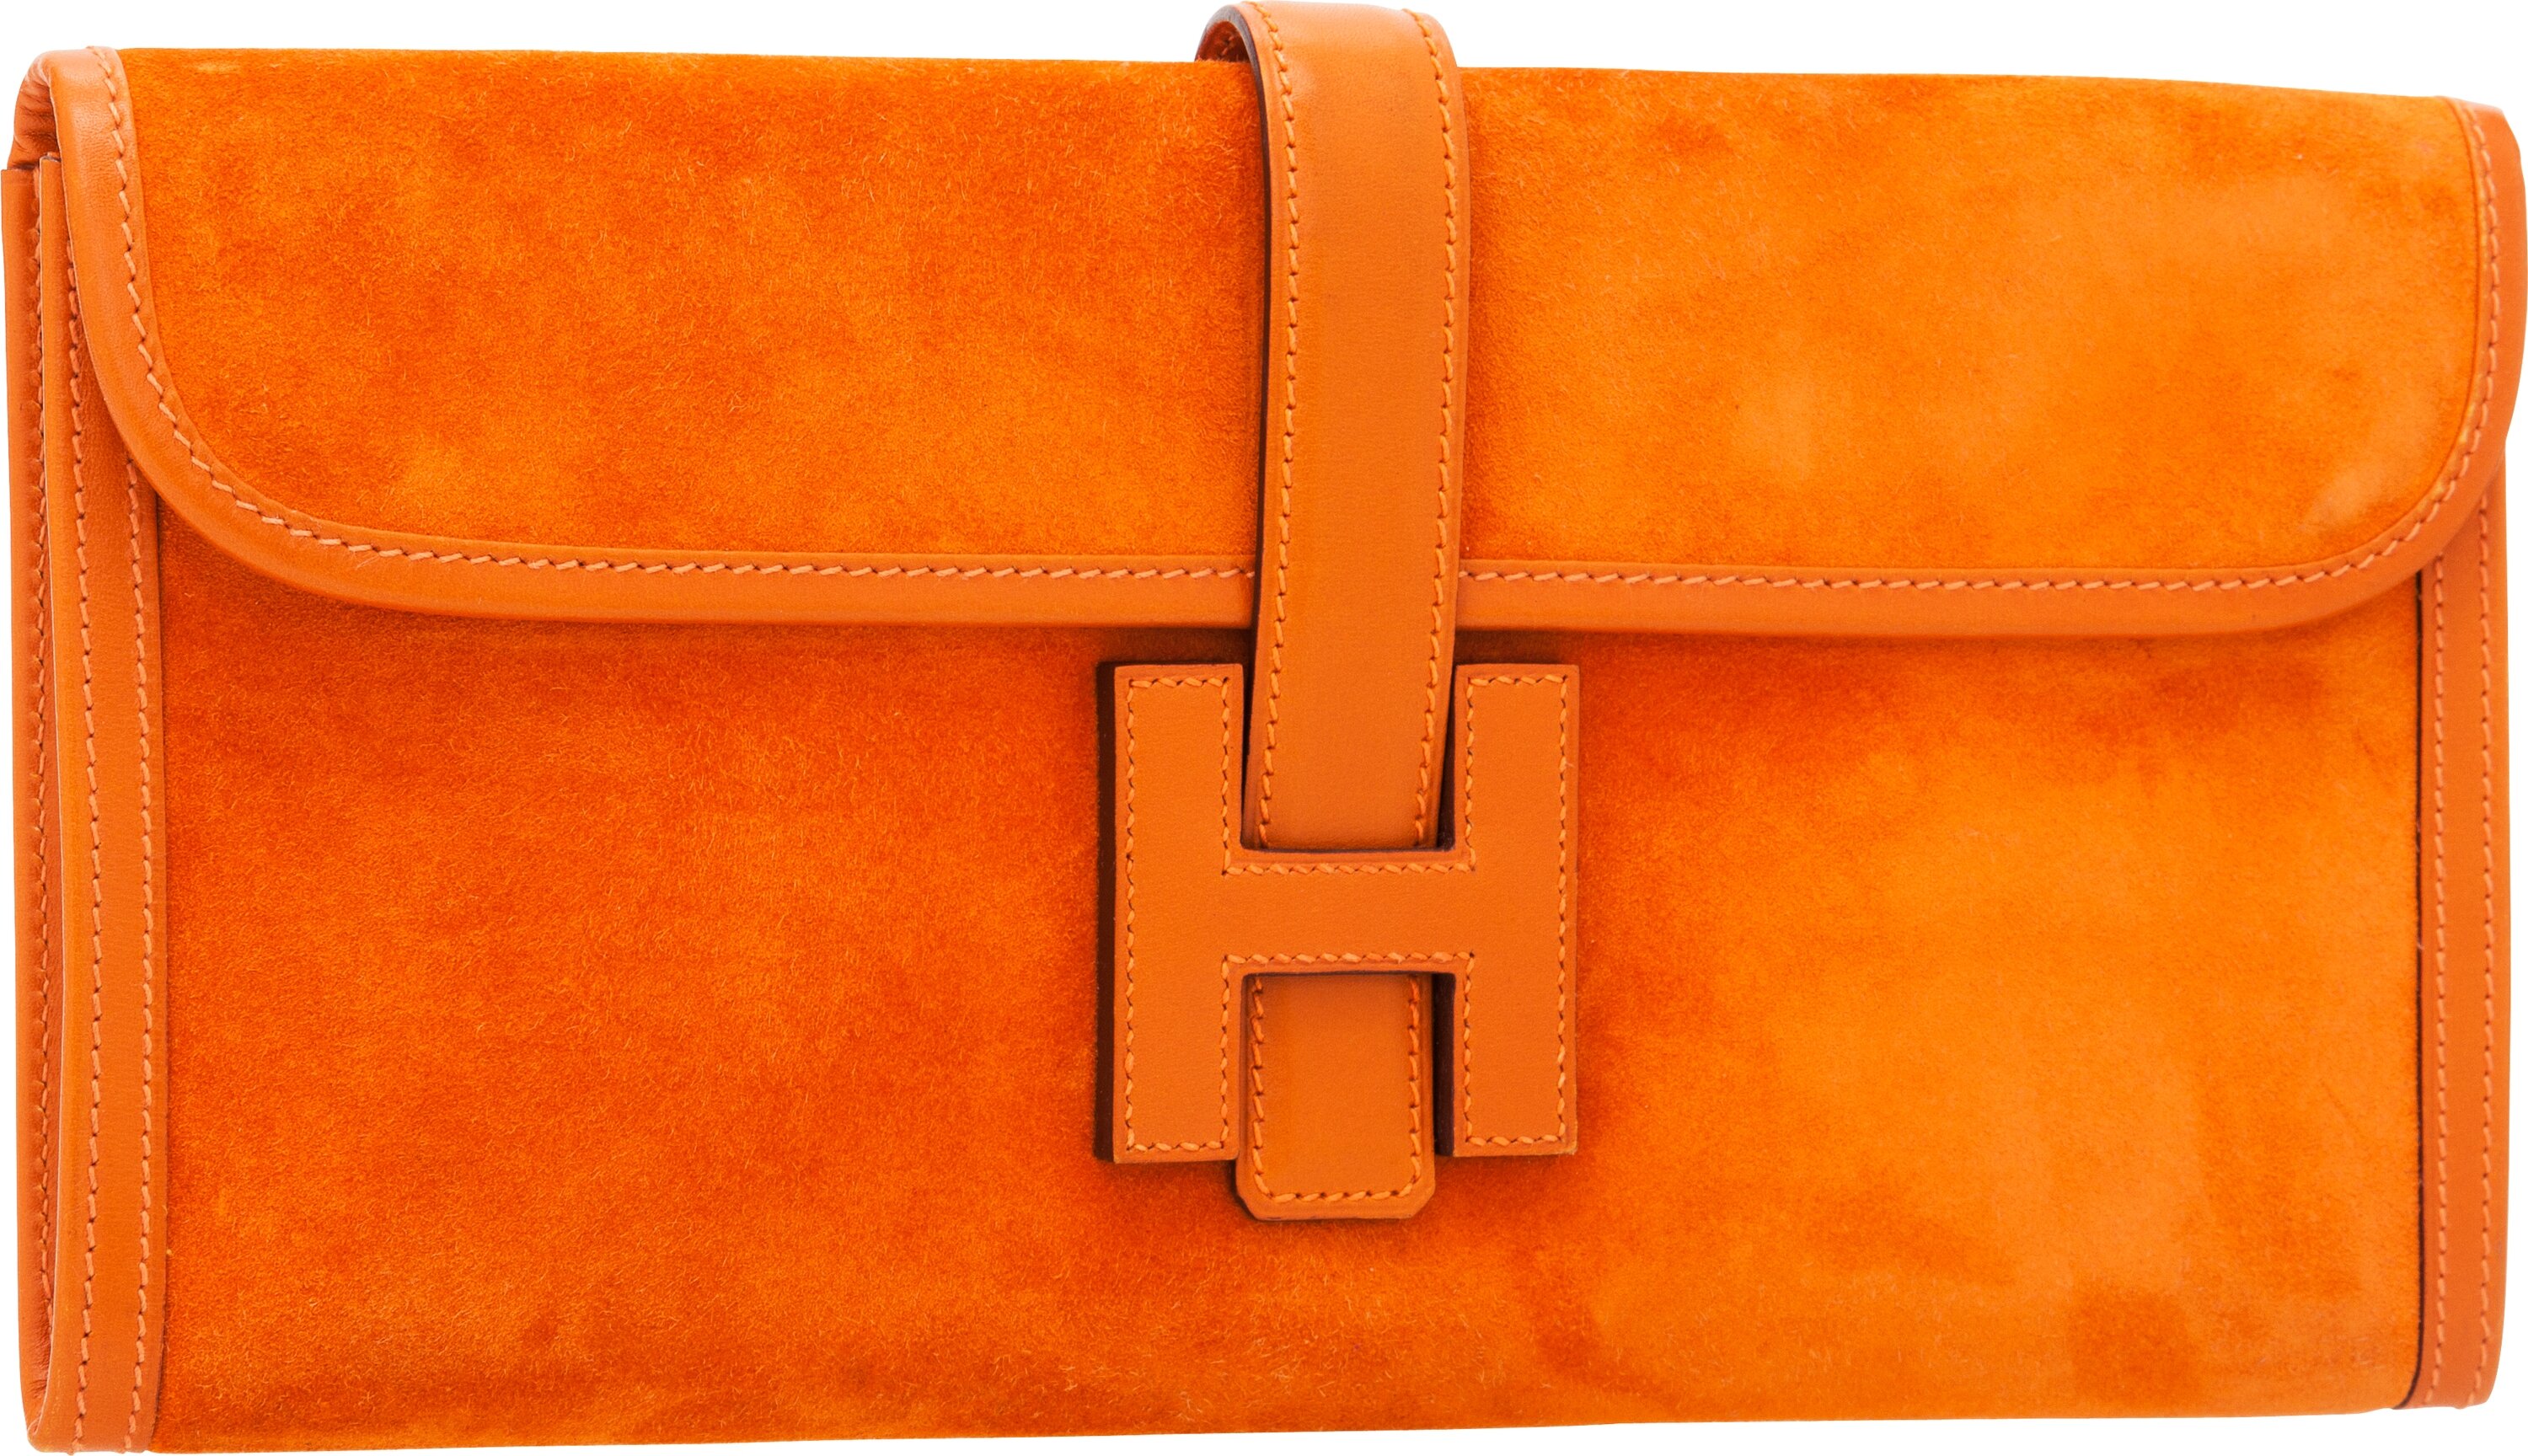 Sold at Auction: A HERMES JIGE CLUTCH BAG